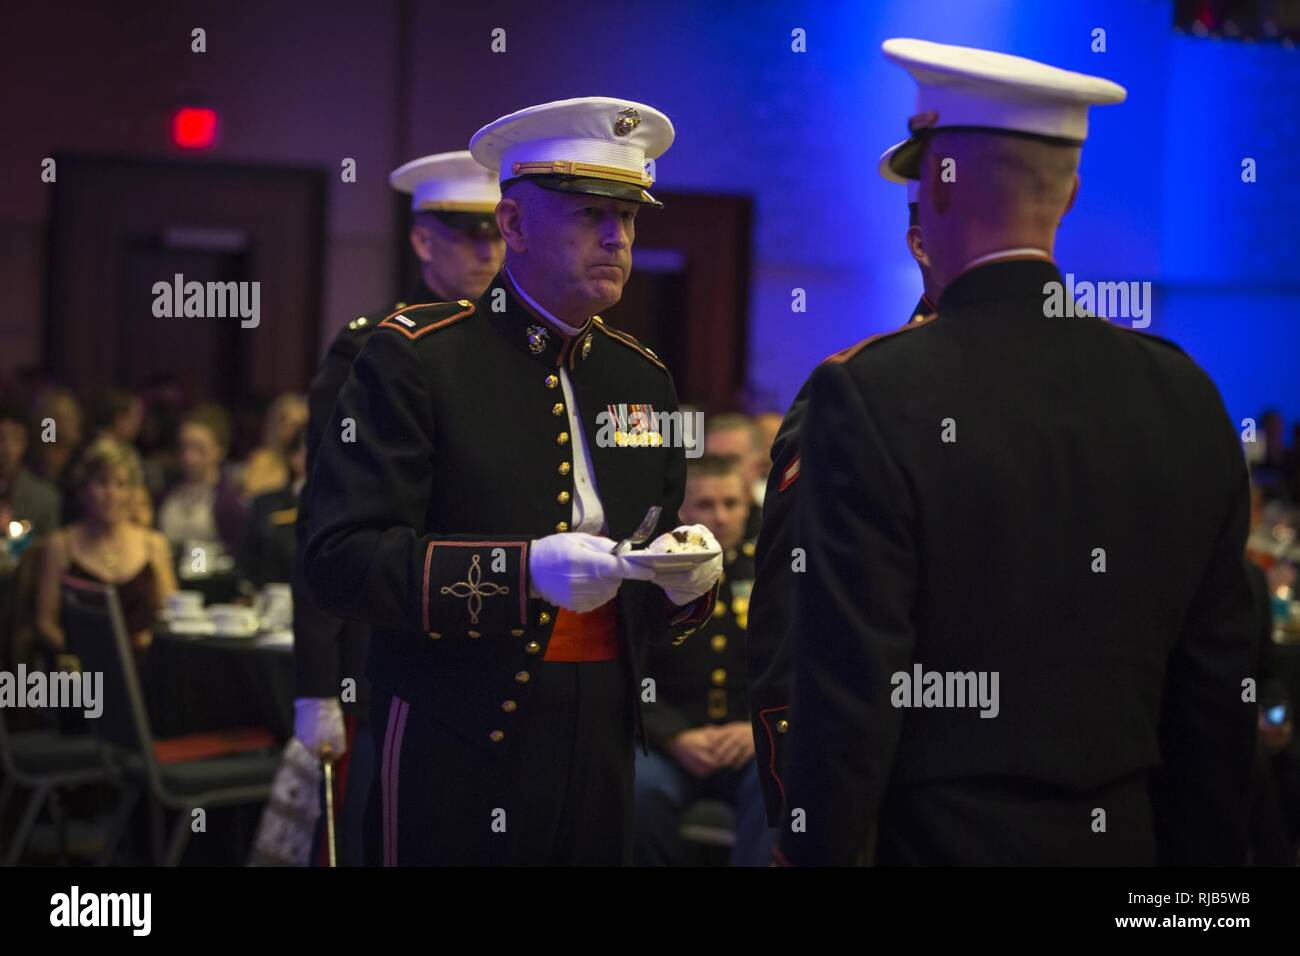 U.S. Marine Corps Chief Warrant Officer 5 Michael W. Edmonson, head of Marine Corps Field Bands, Office of United States Marine Corps Communication, eats a piece of cake during he Headquarters & Service Battalion Marine Corps Ball, Renaissance Arlington Capitol View Hotel, Arlington, Va., Nov. 05, 2016. Edmonson was recognized as the oldest Marine present during the celebration of the Marine Corps’ 241st birthday. Stock Photo